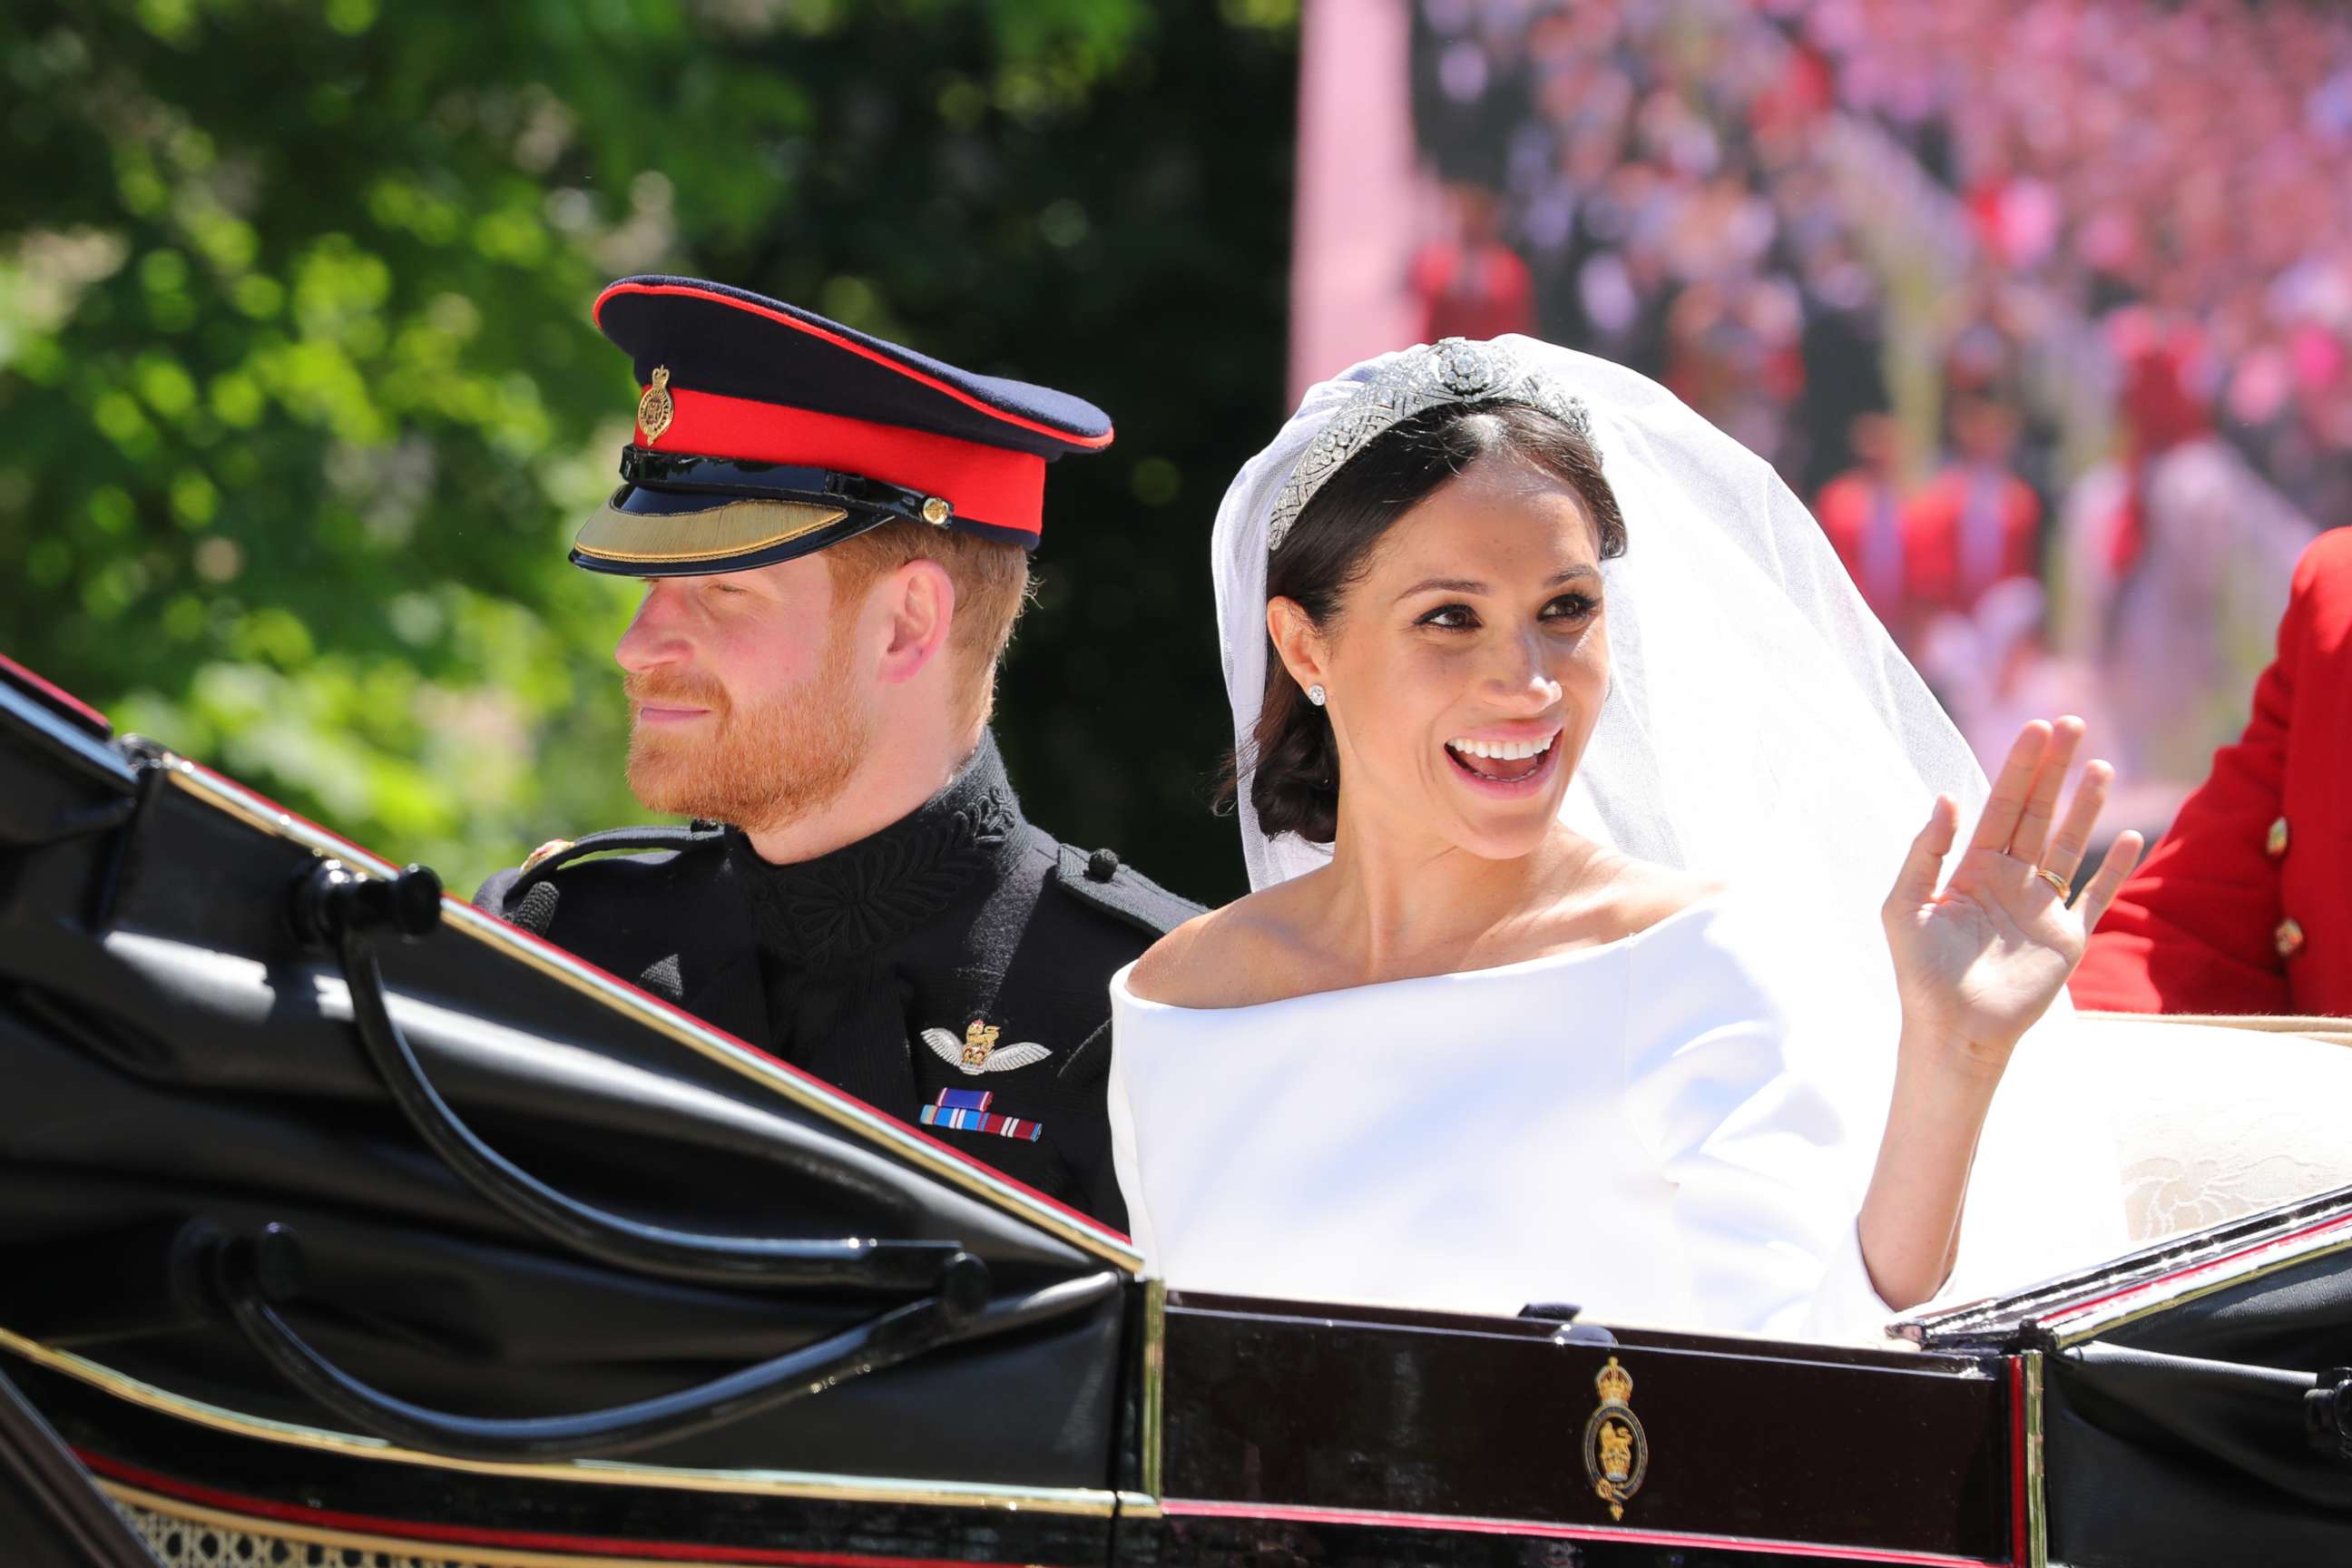 PHOTO: Prince Harry, Duke of Sussex and Meghan Markle, Duchess of Sussex leave Windsor Castle in the Ascot Landau carriage during the procession after getting married, Windsor Castle, May 19, 2018 in Windsor.